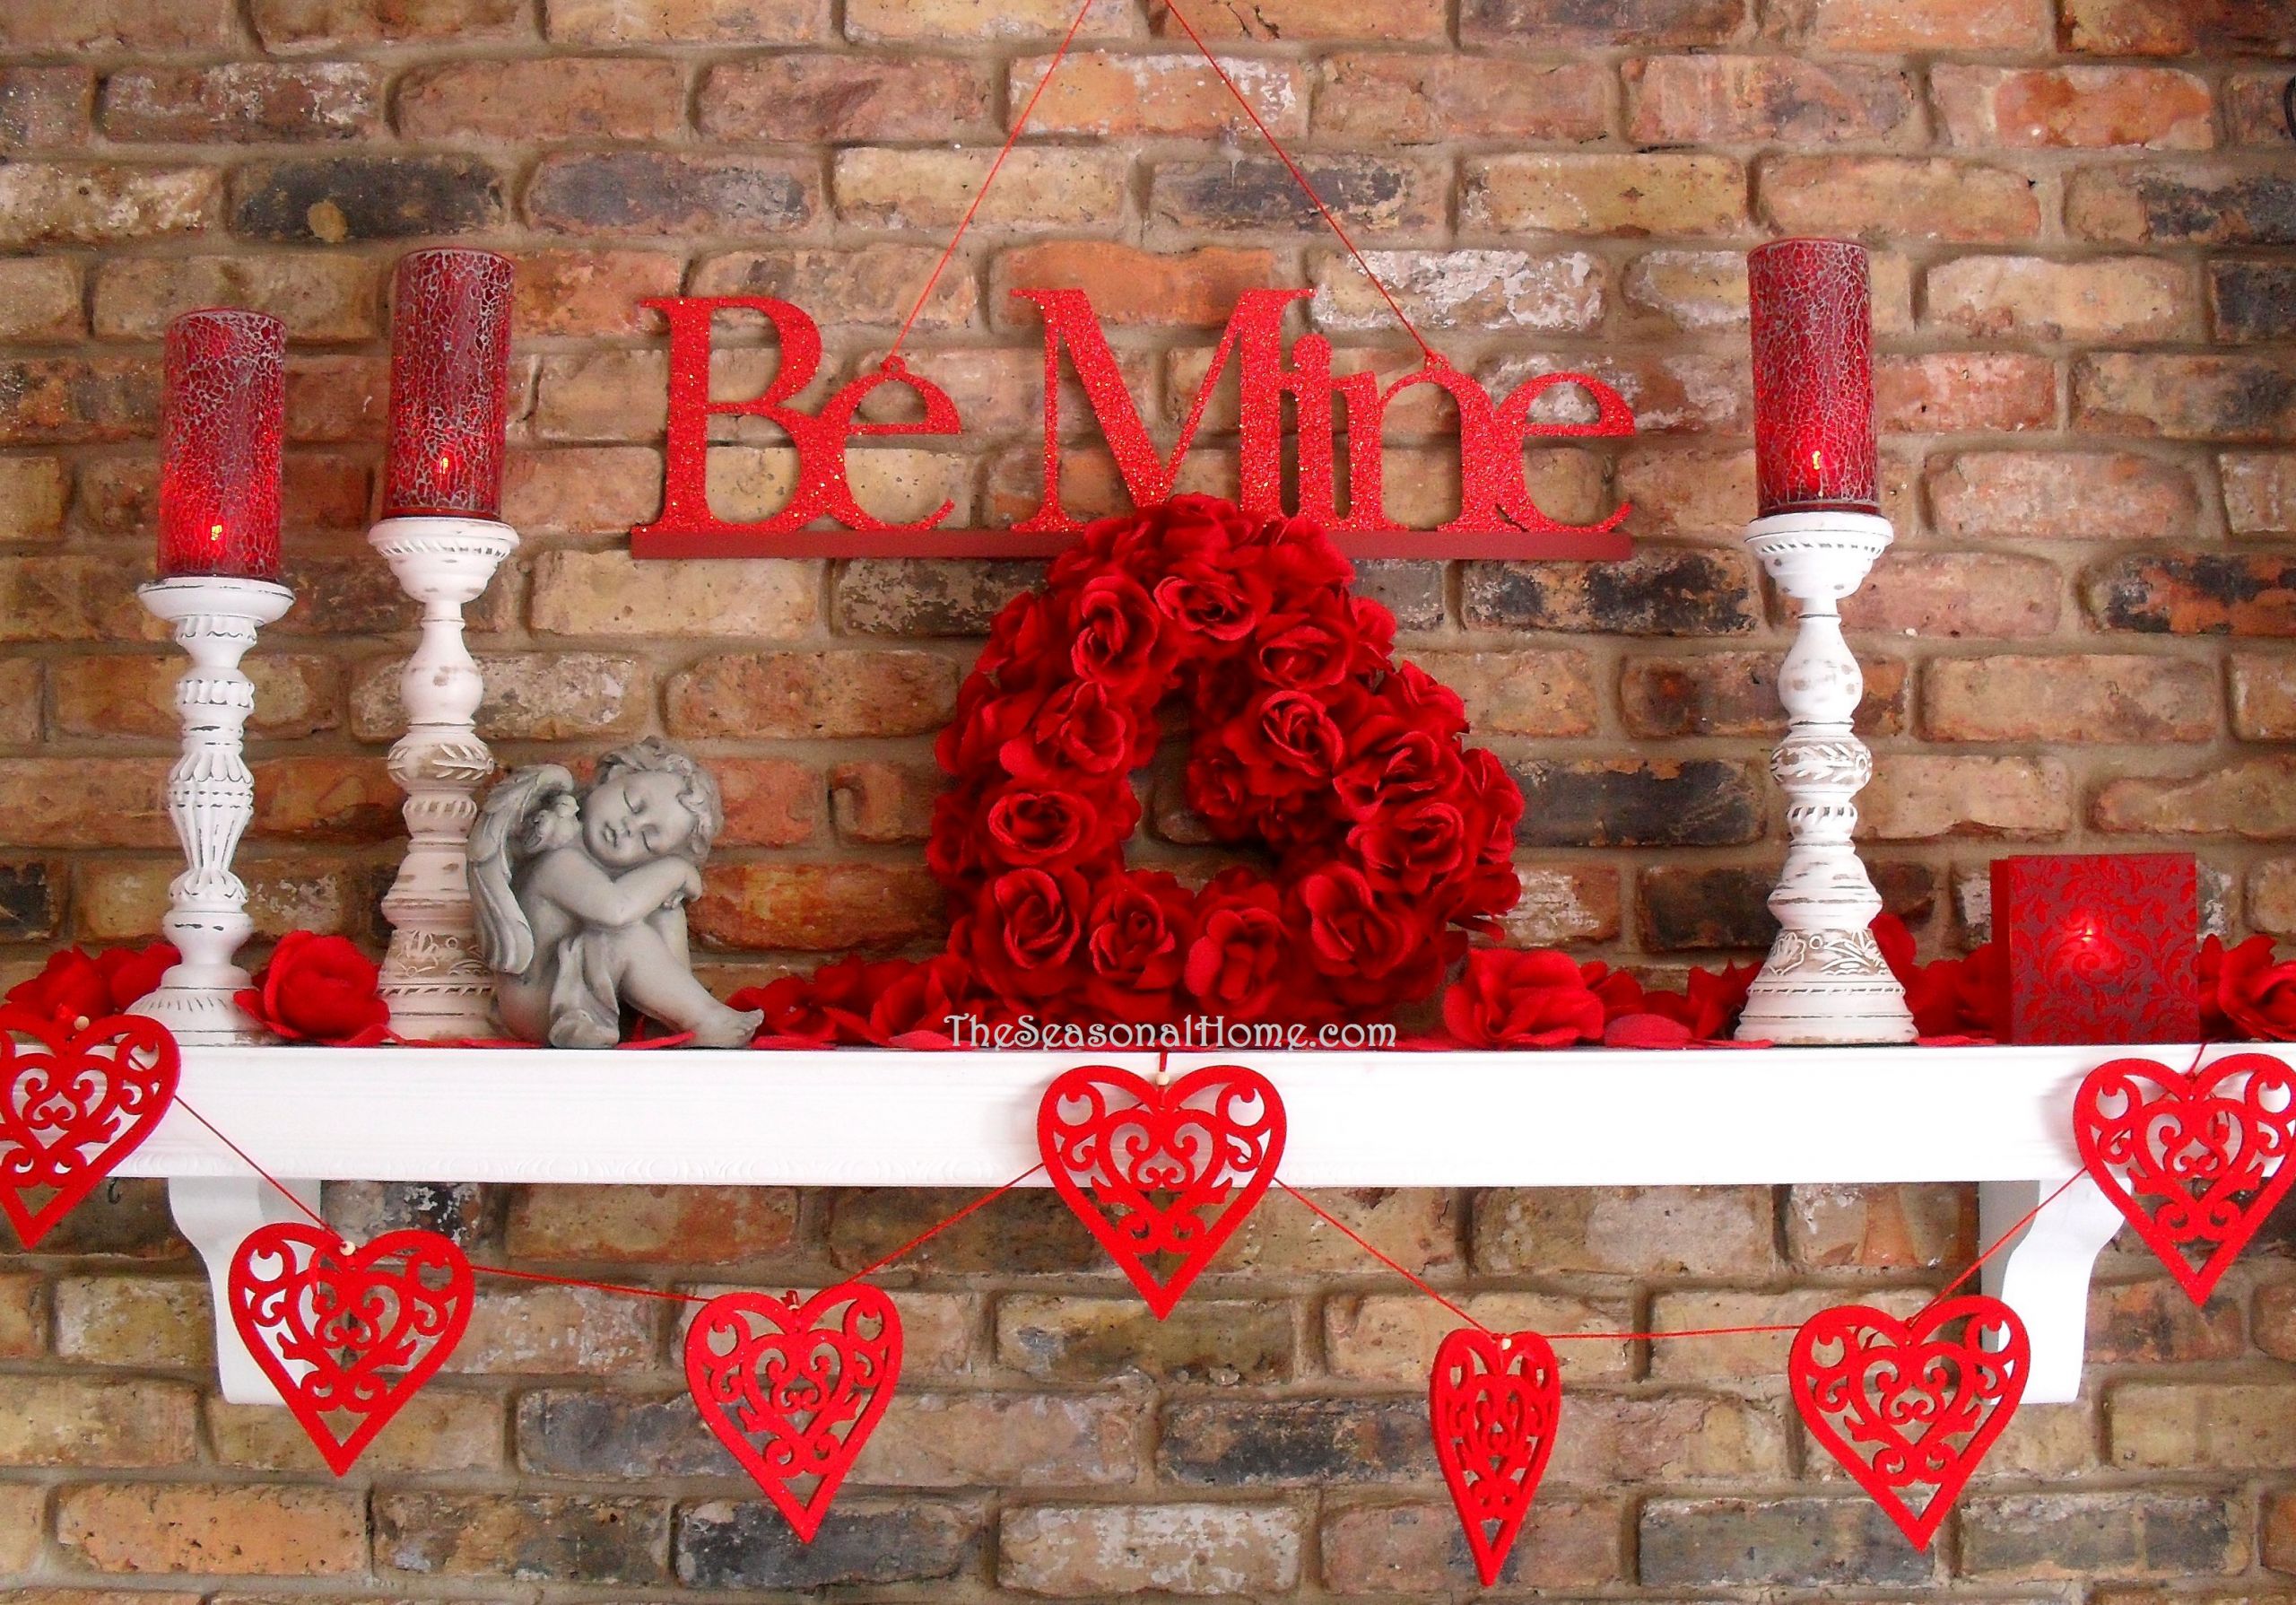 Romantic Decorating Ideas For Valentines Day
 Inexpensive Decorations for St Valentine’s Day The